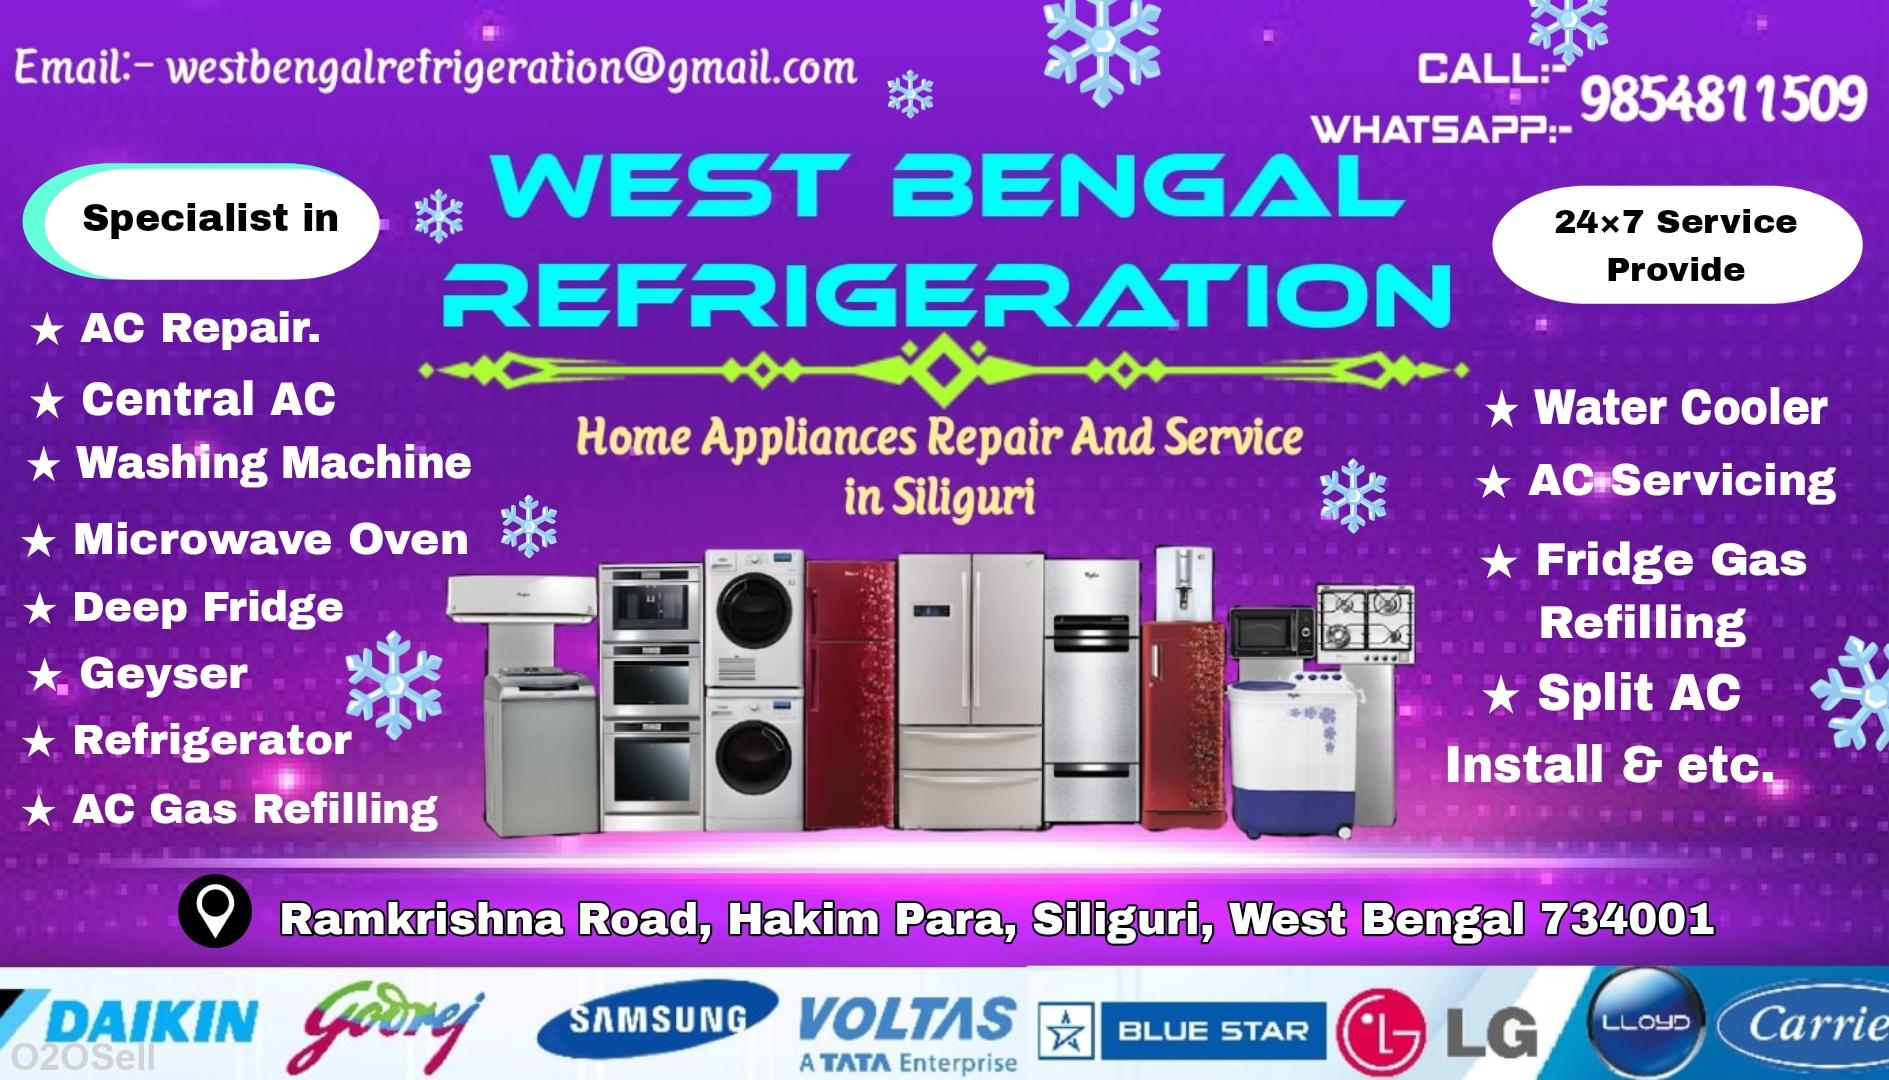 WEST BENGAL REFRIGERATION - Cover Image